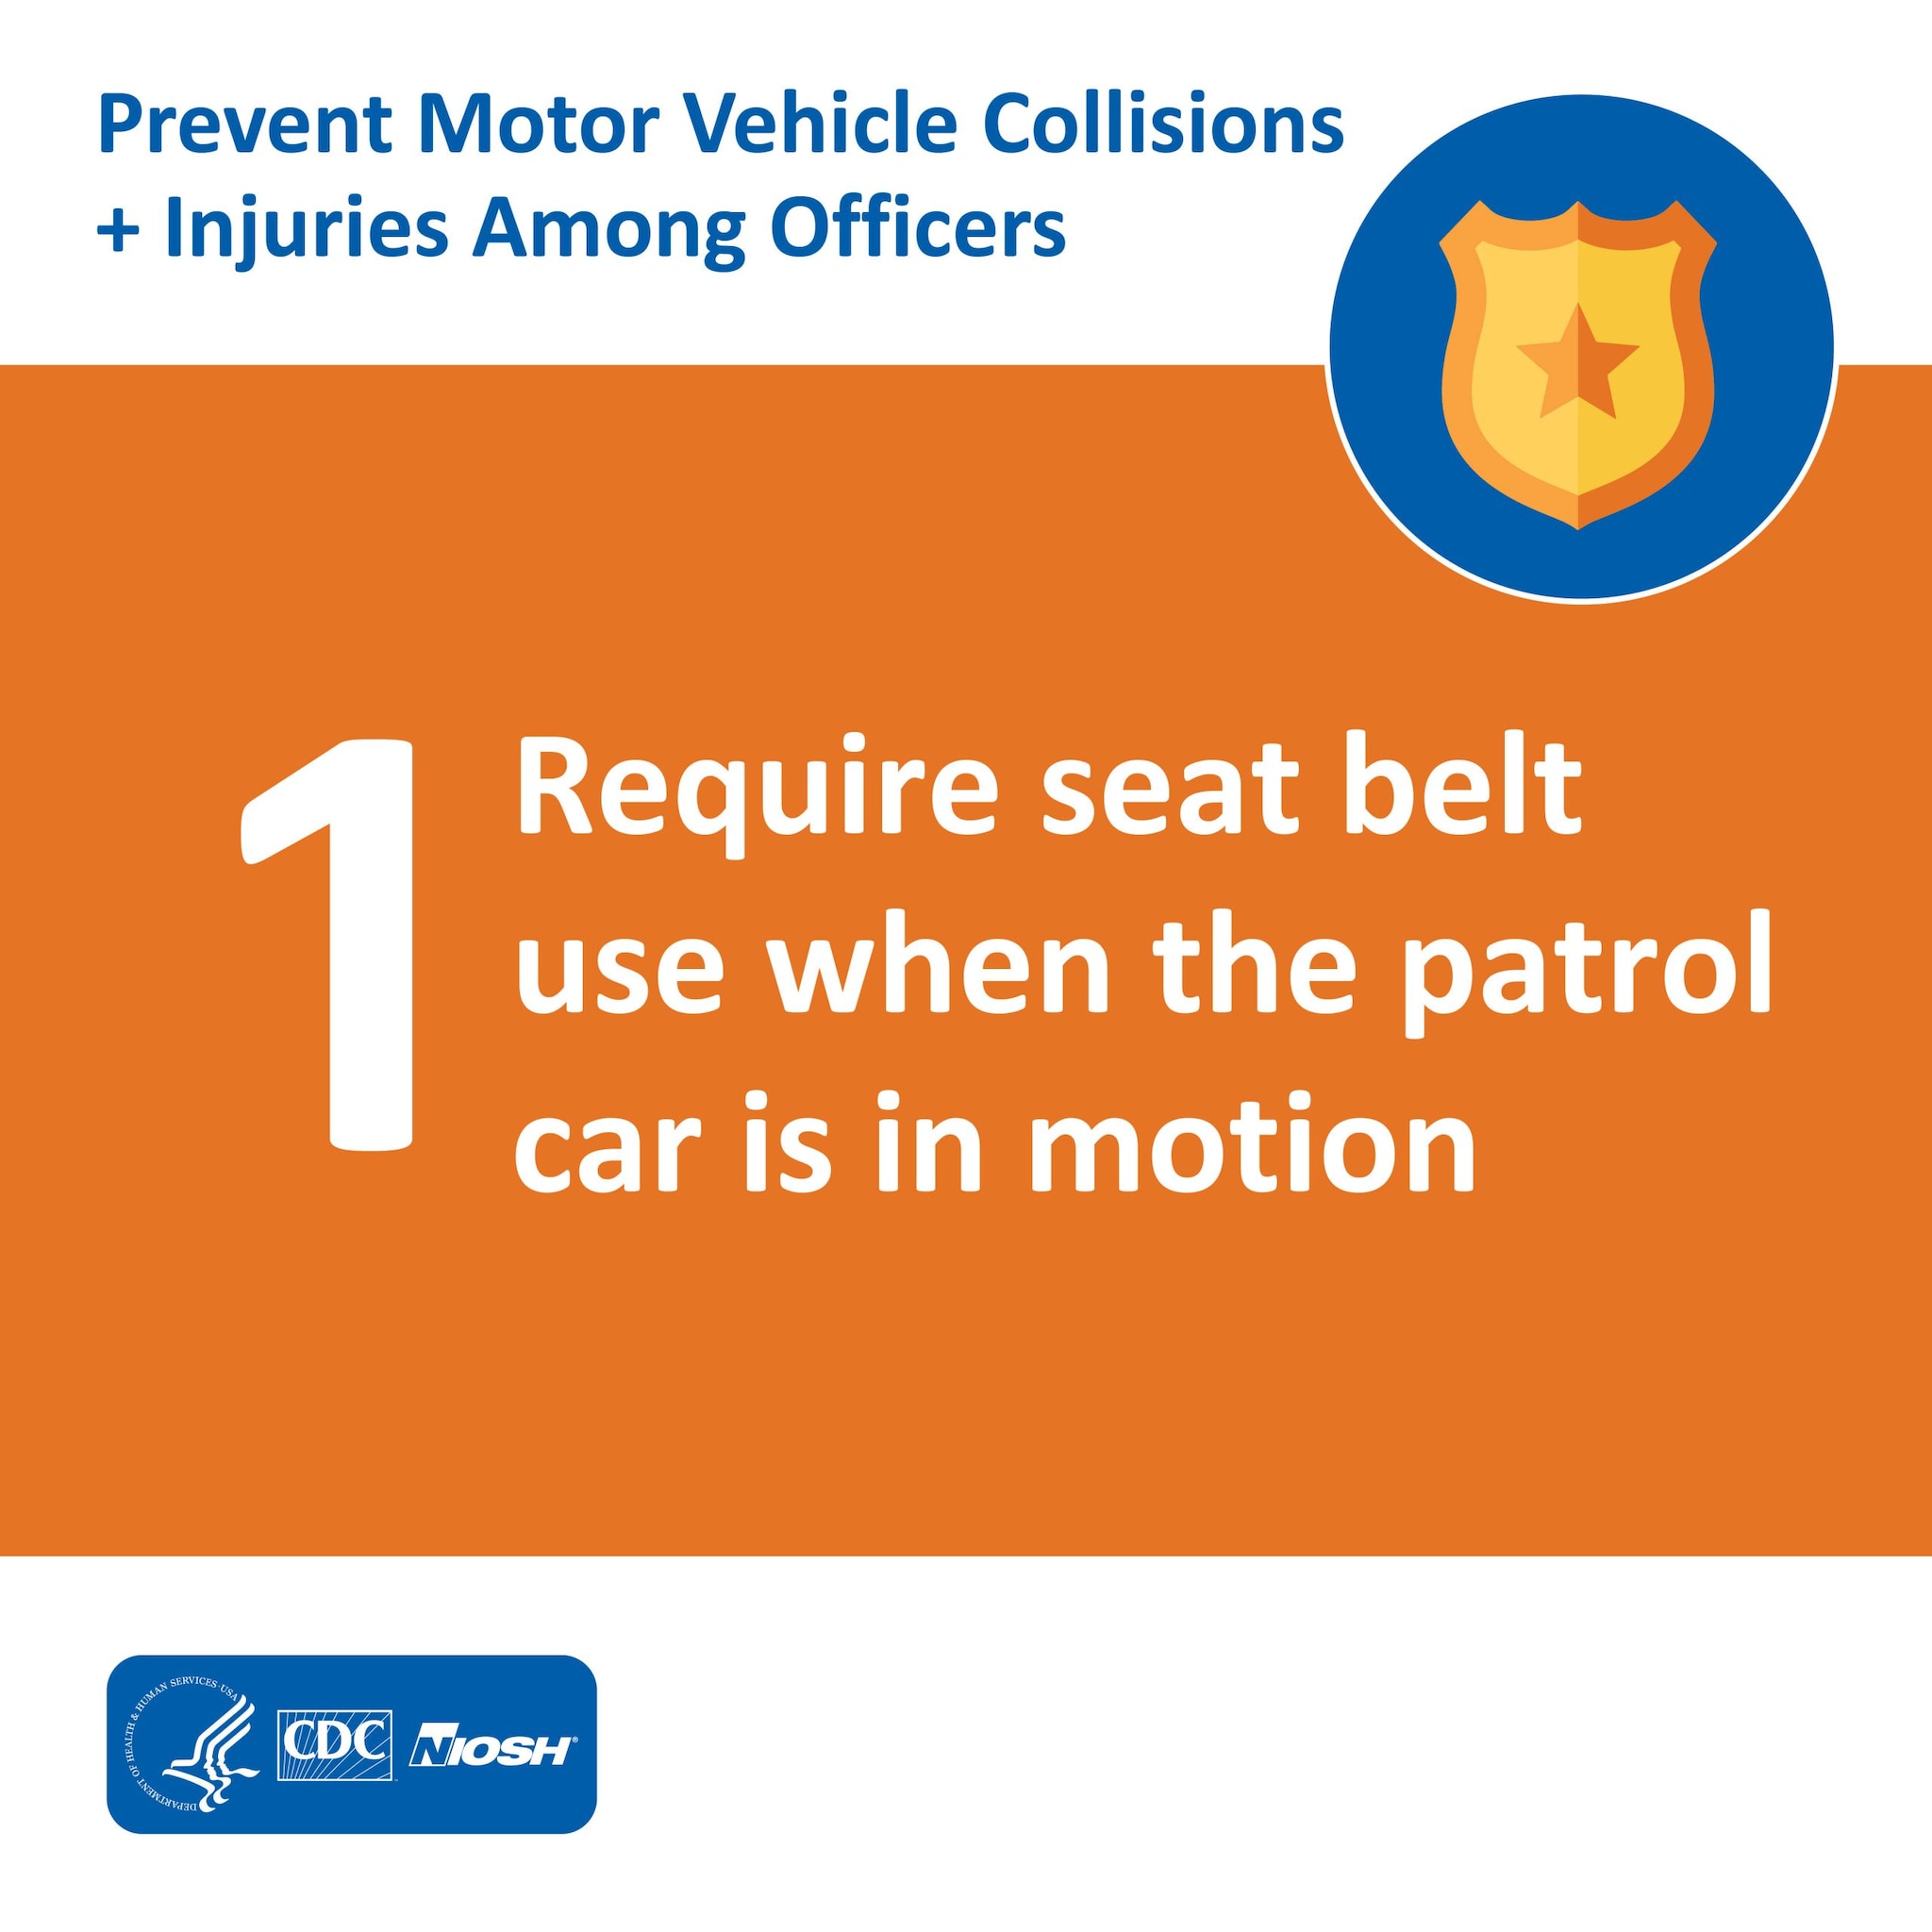 Prevent Motor Vehicle Collisions + Injuries Among Officers: 1 Require seat belt use when the patrol car is in motion